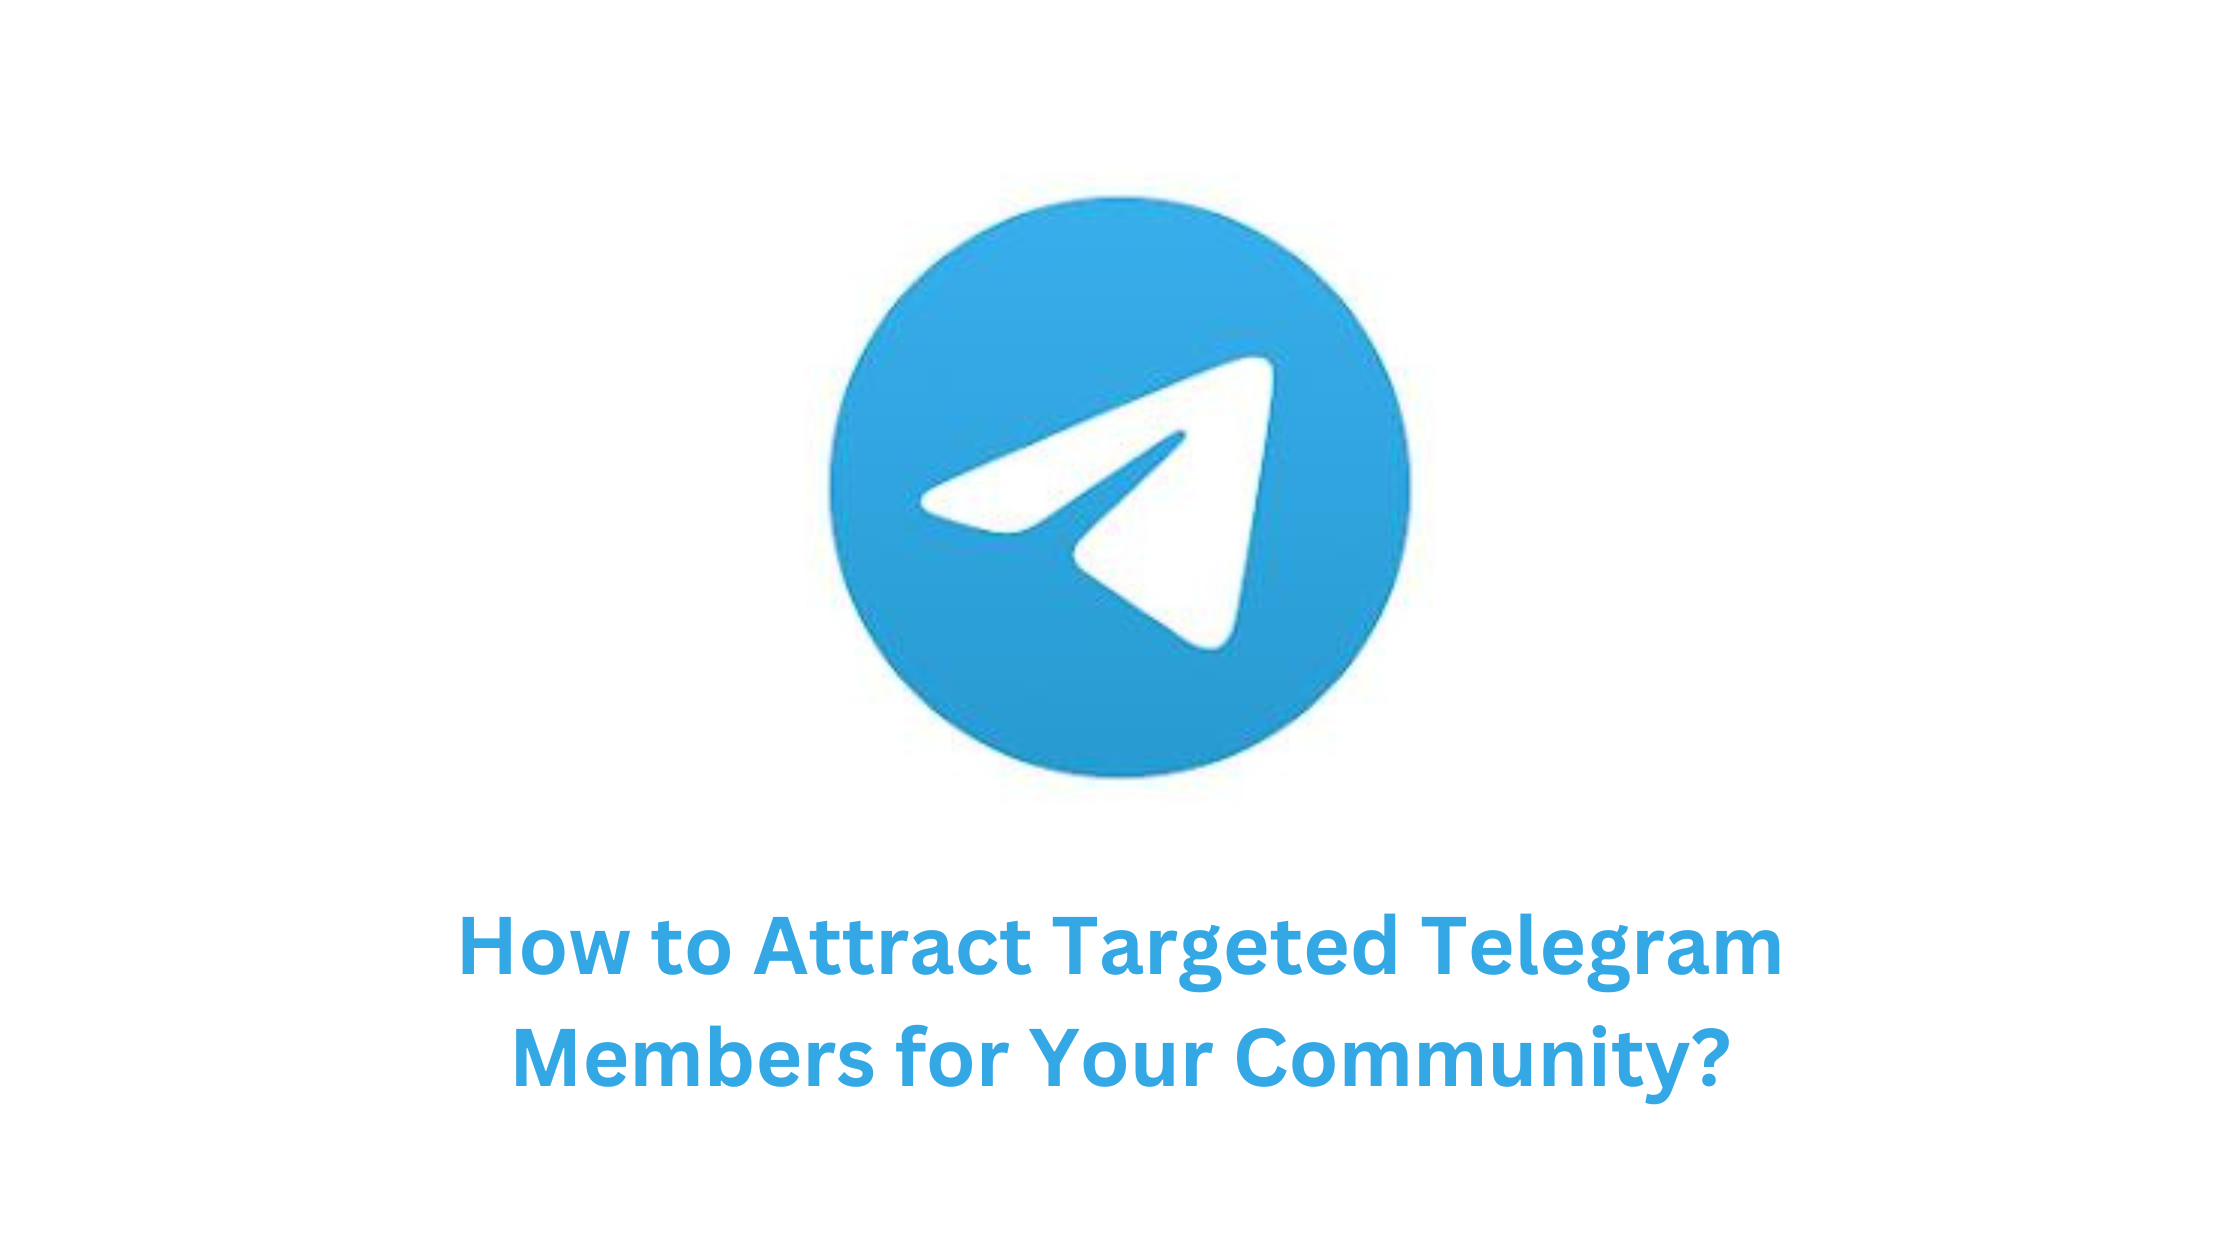 How to Attract Targeted Telegram Members for Your Community